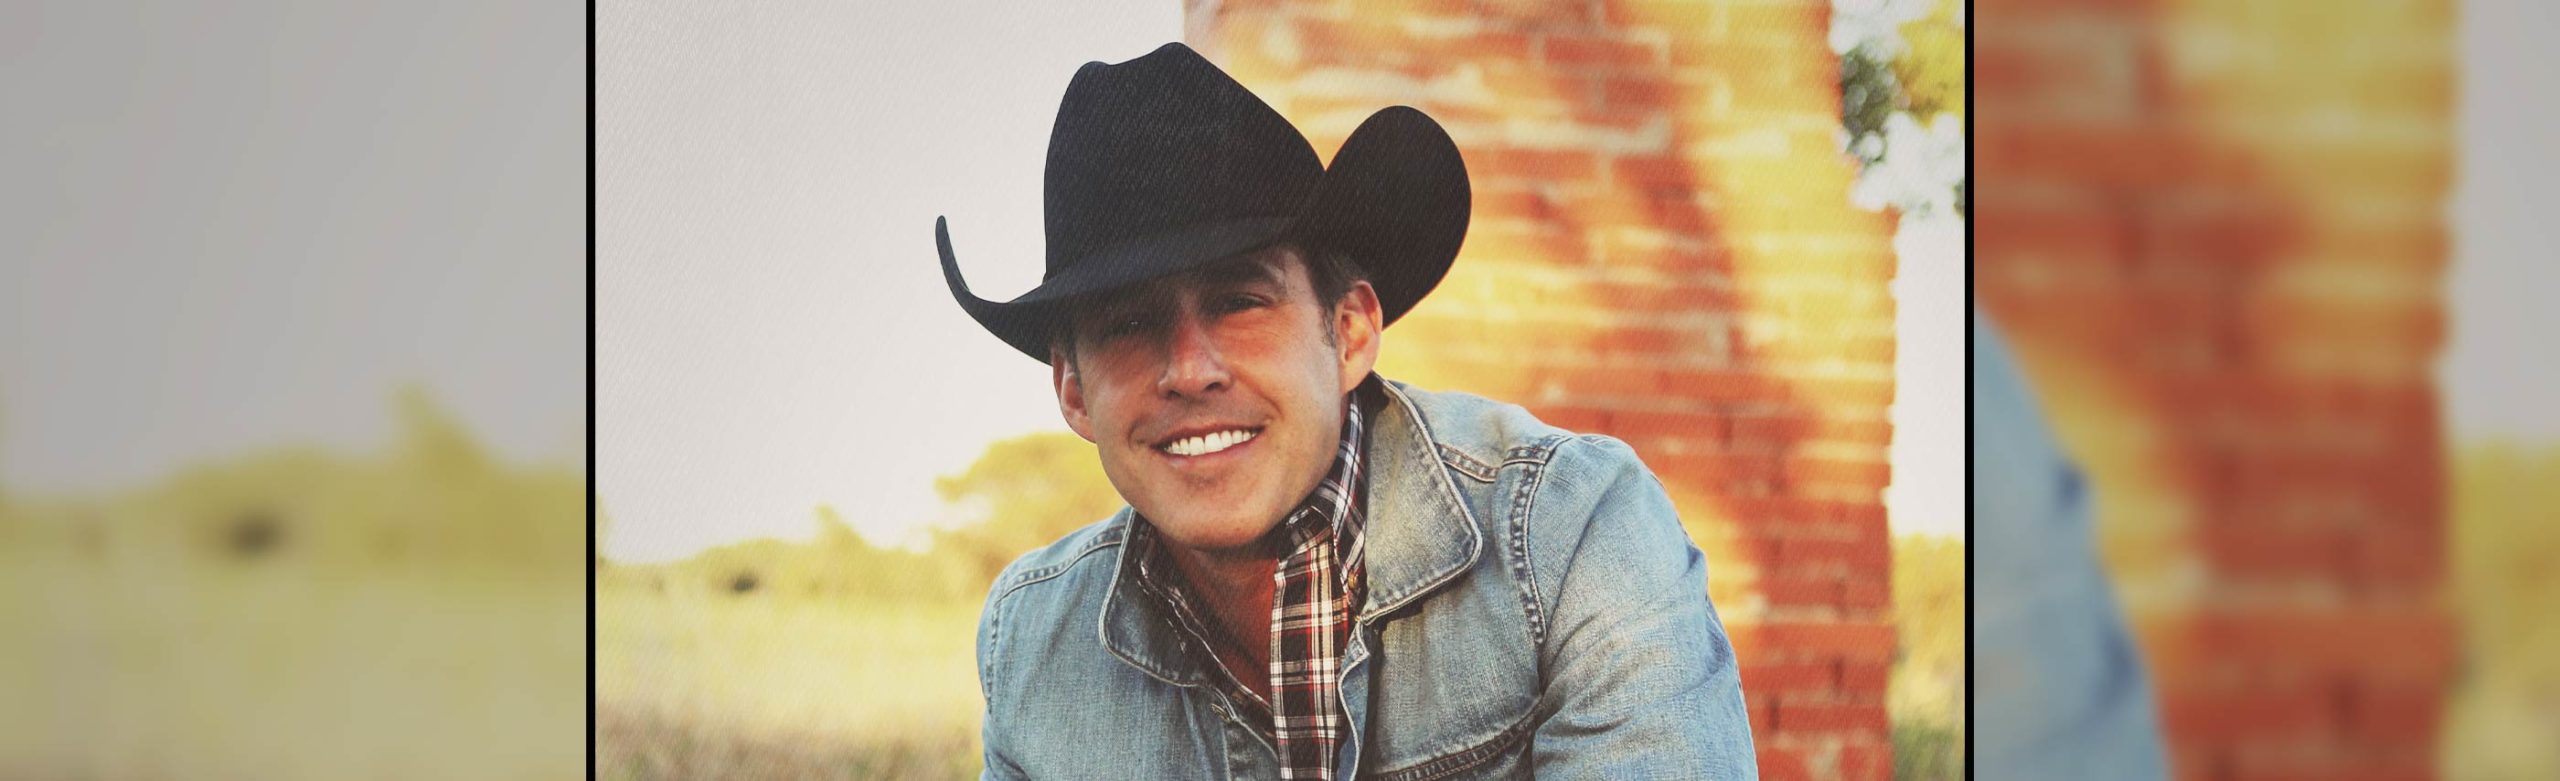 Aaron Watson at The ELM Tickets Giveaway 2022 Image